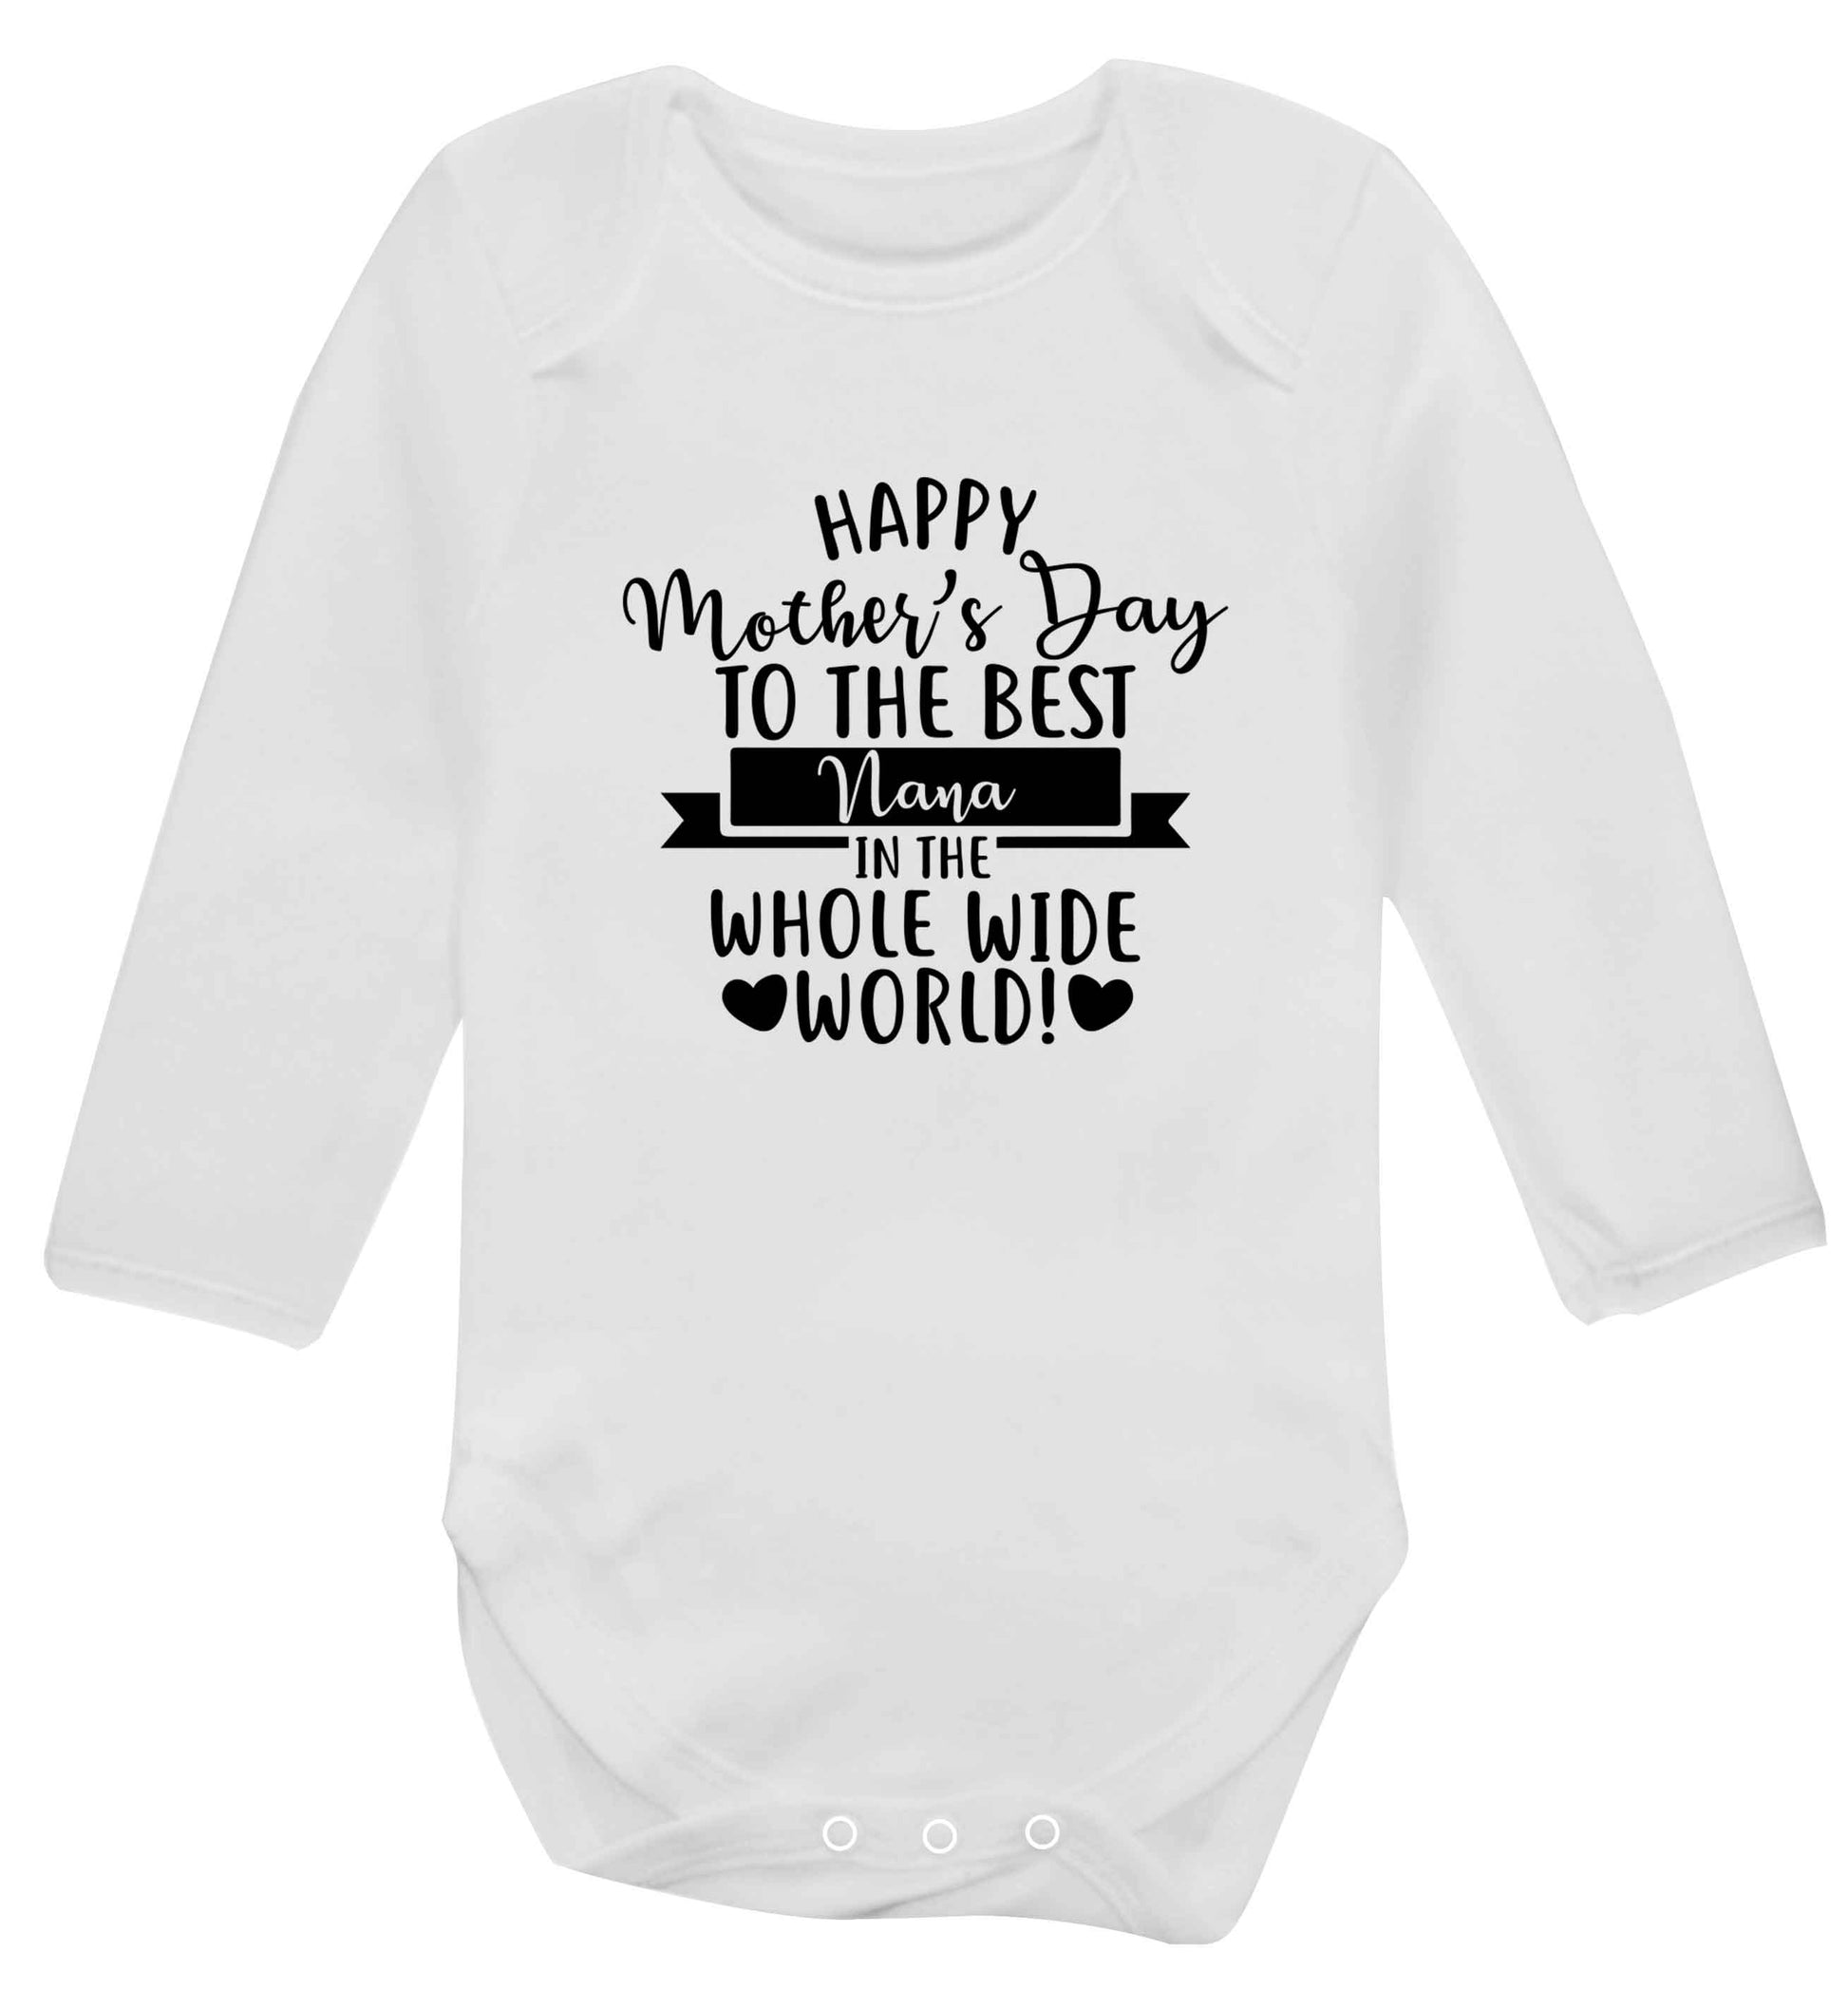 Happy mother's day to the best nana in the world baby vest long sleeved white 6-12 months